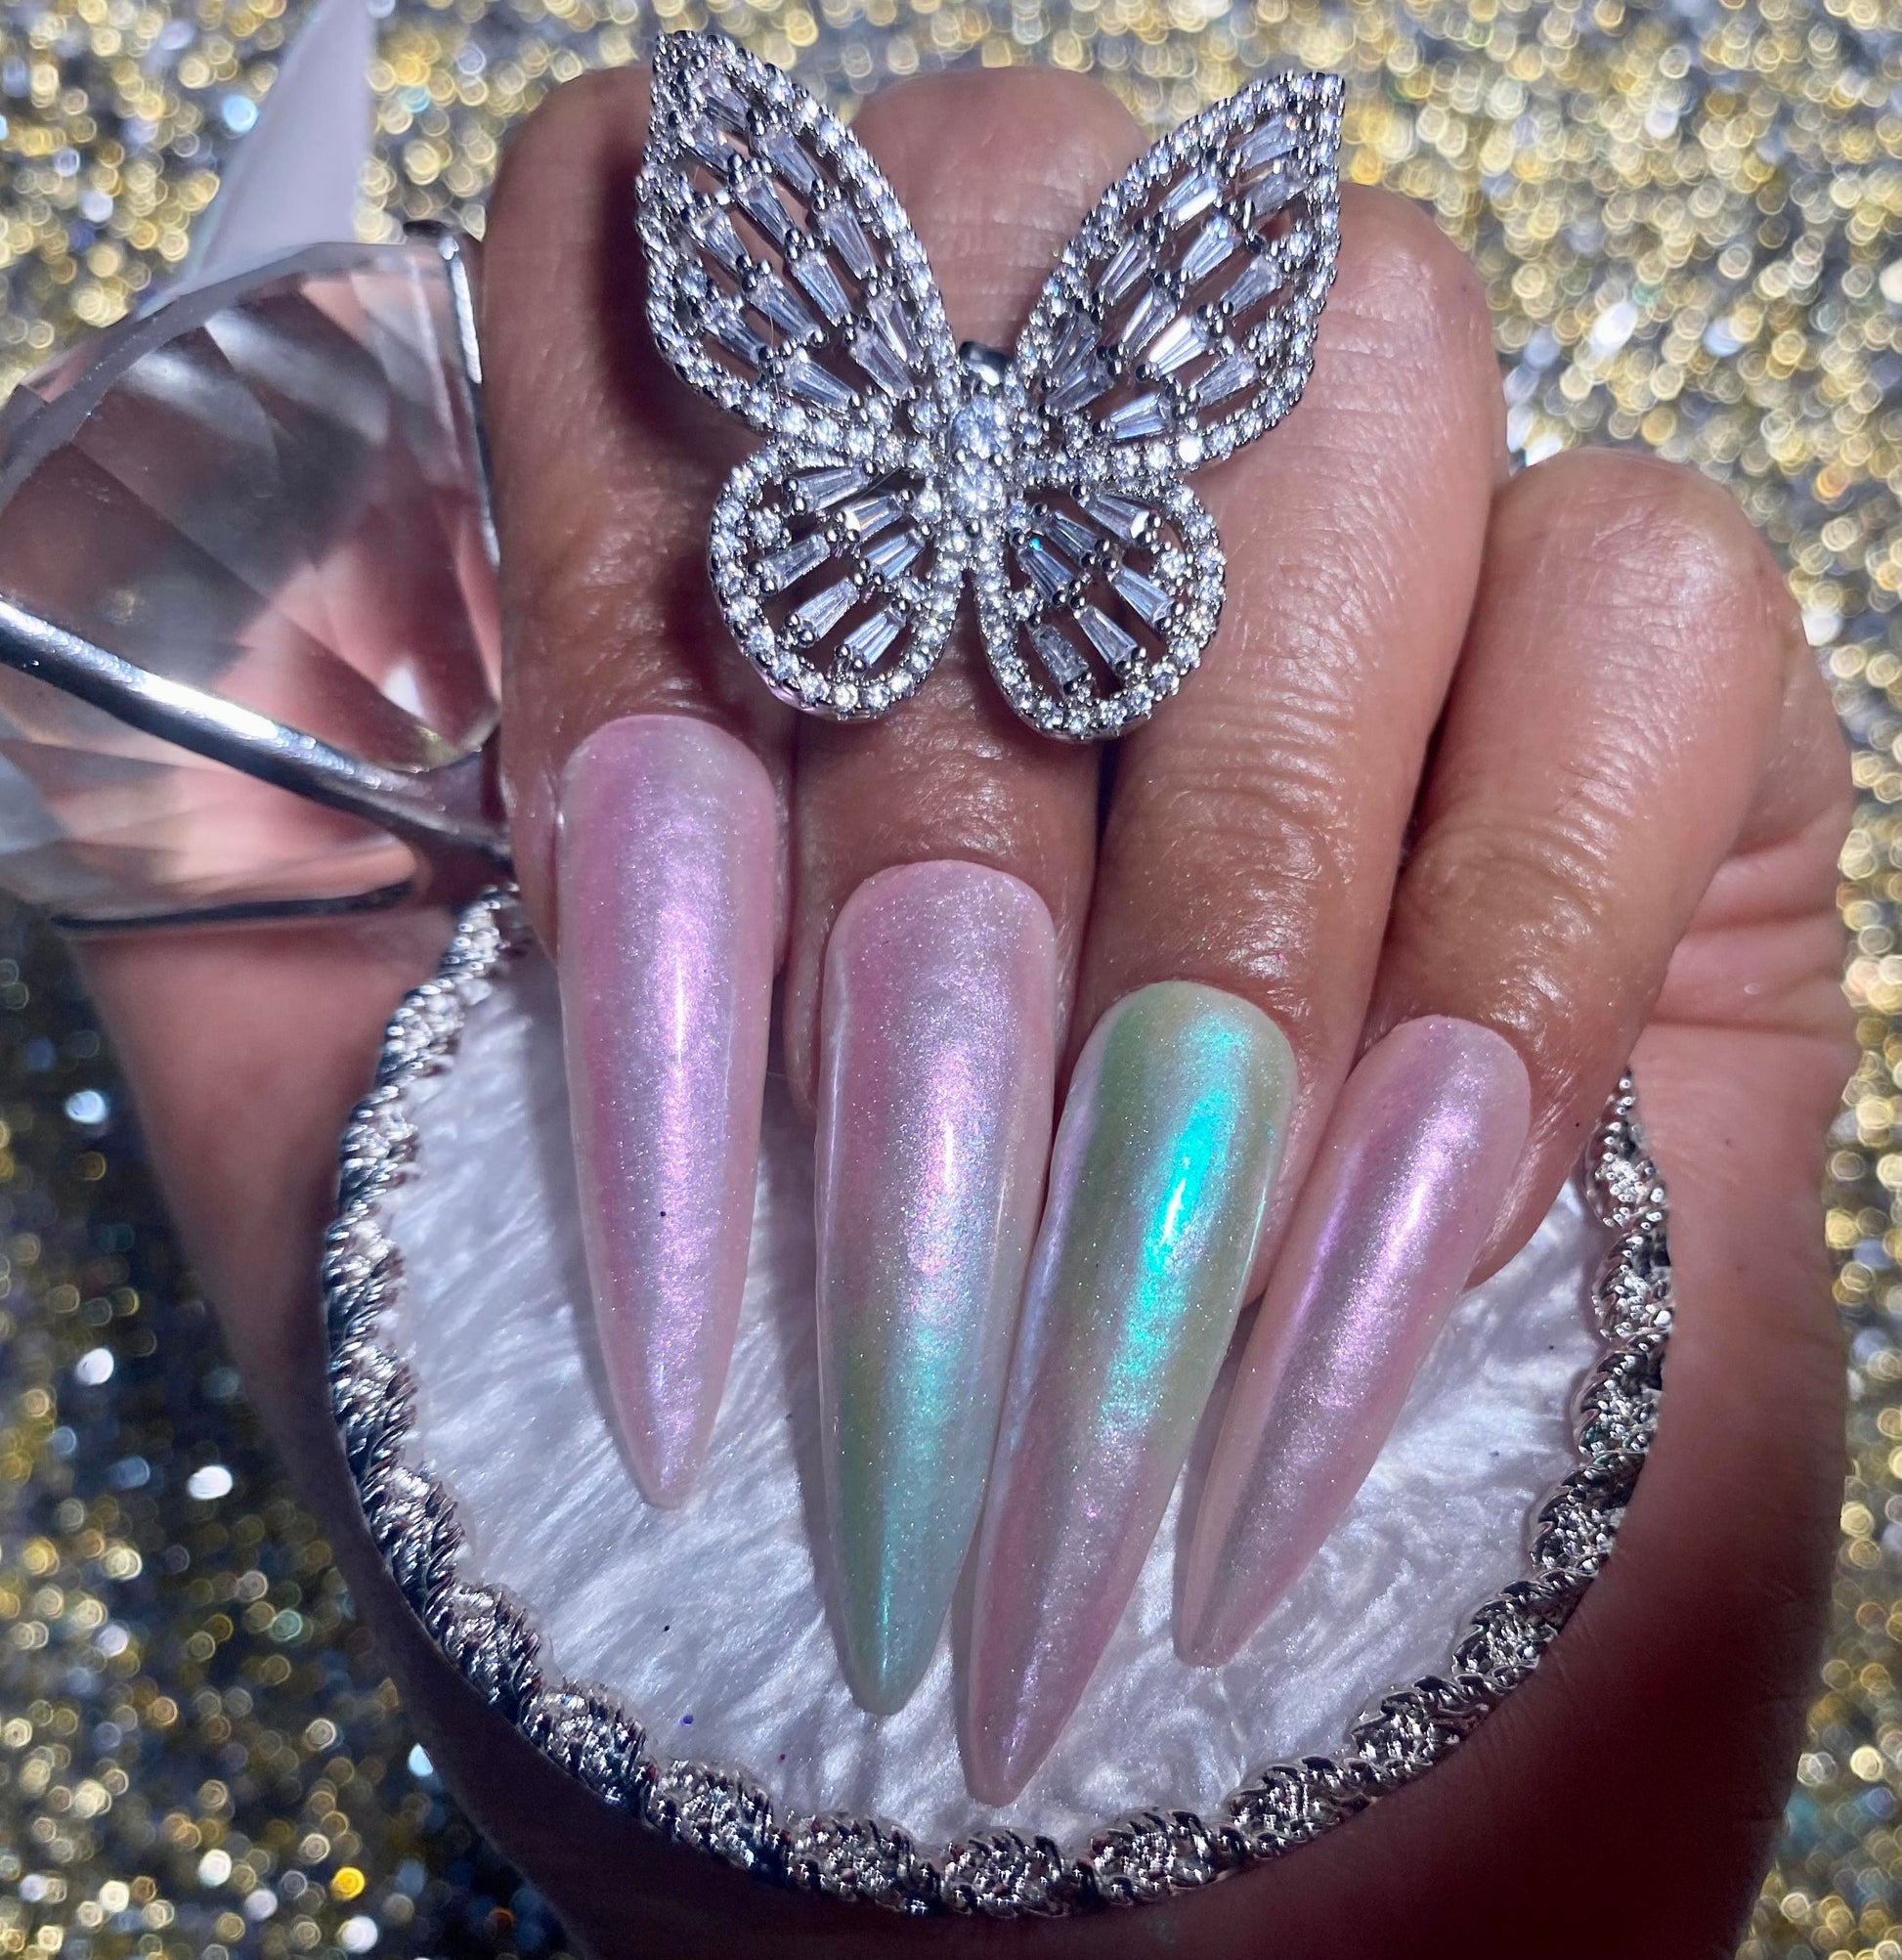 Chrome Nail Powder - 8-Color Mirror Effect and Holographic Glitter